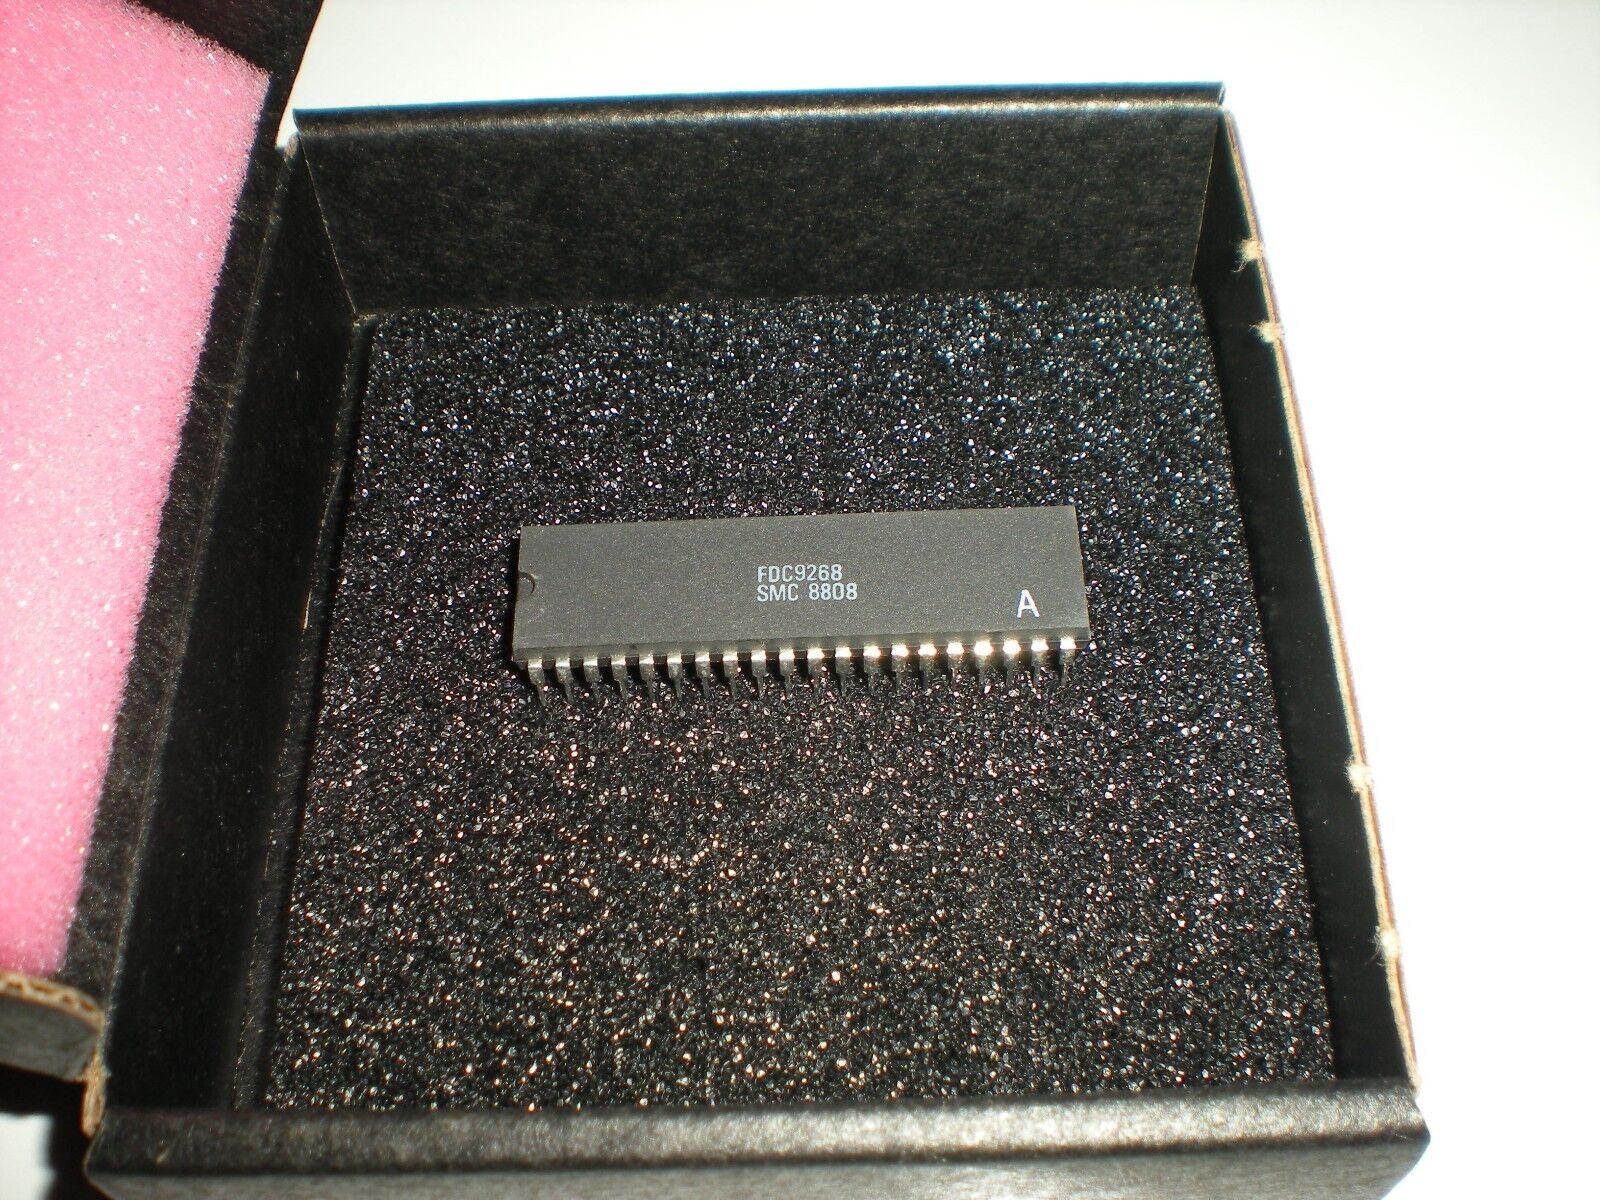 FDC9268 FDC 9268 floppy control IC chip for Commodore PC-10-III, PC-1 & A2088 